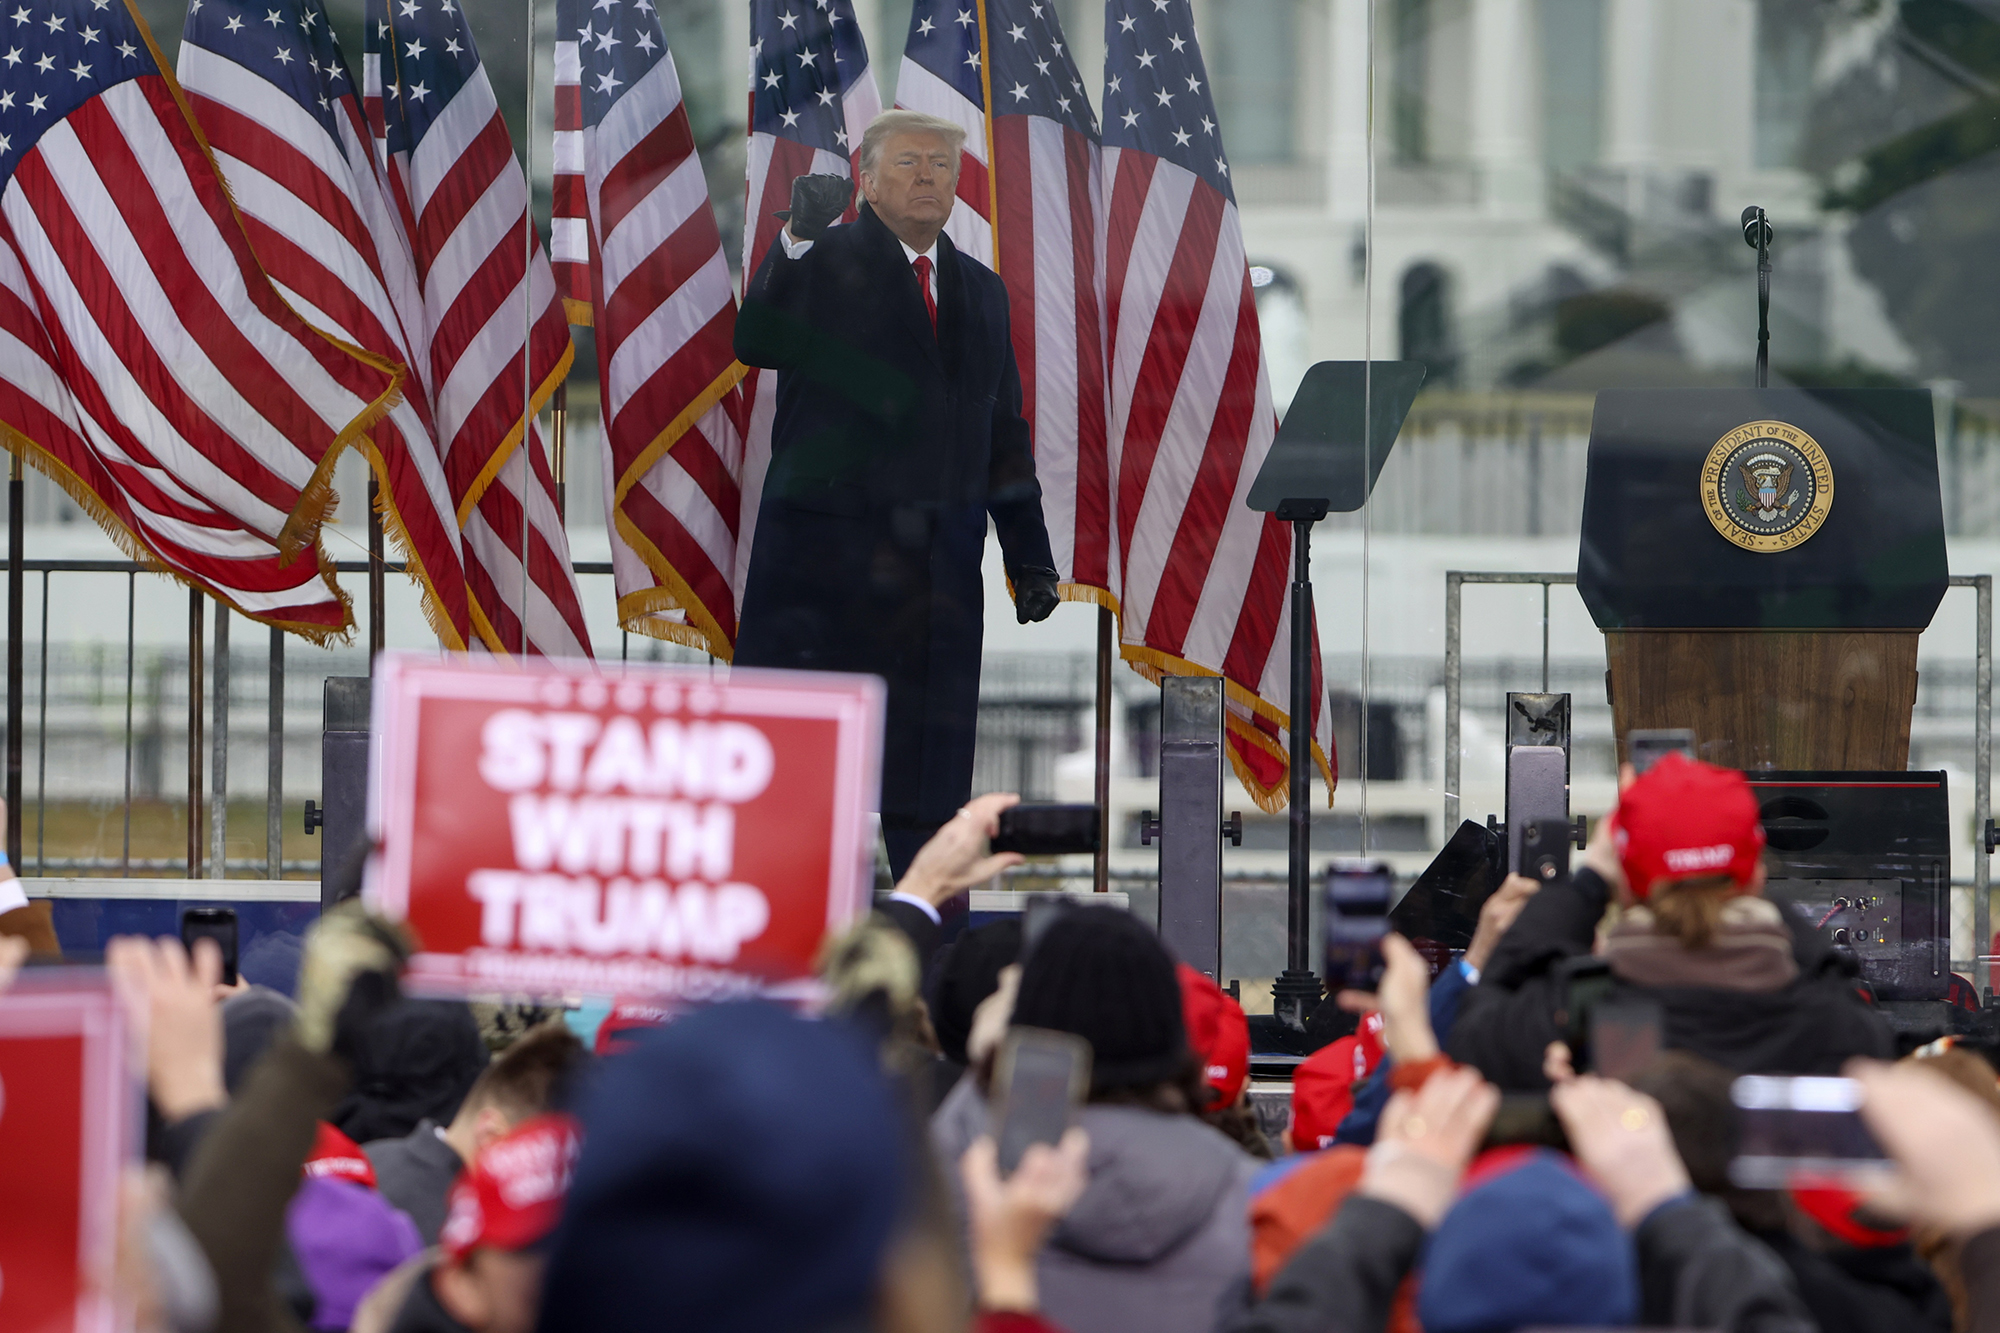 PHOTO: President Donald Trump greets the crowd at the "Stop The Steal" Rally in Washington, Jan. 06, 2021.